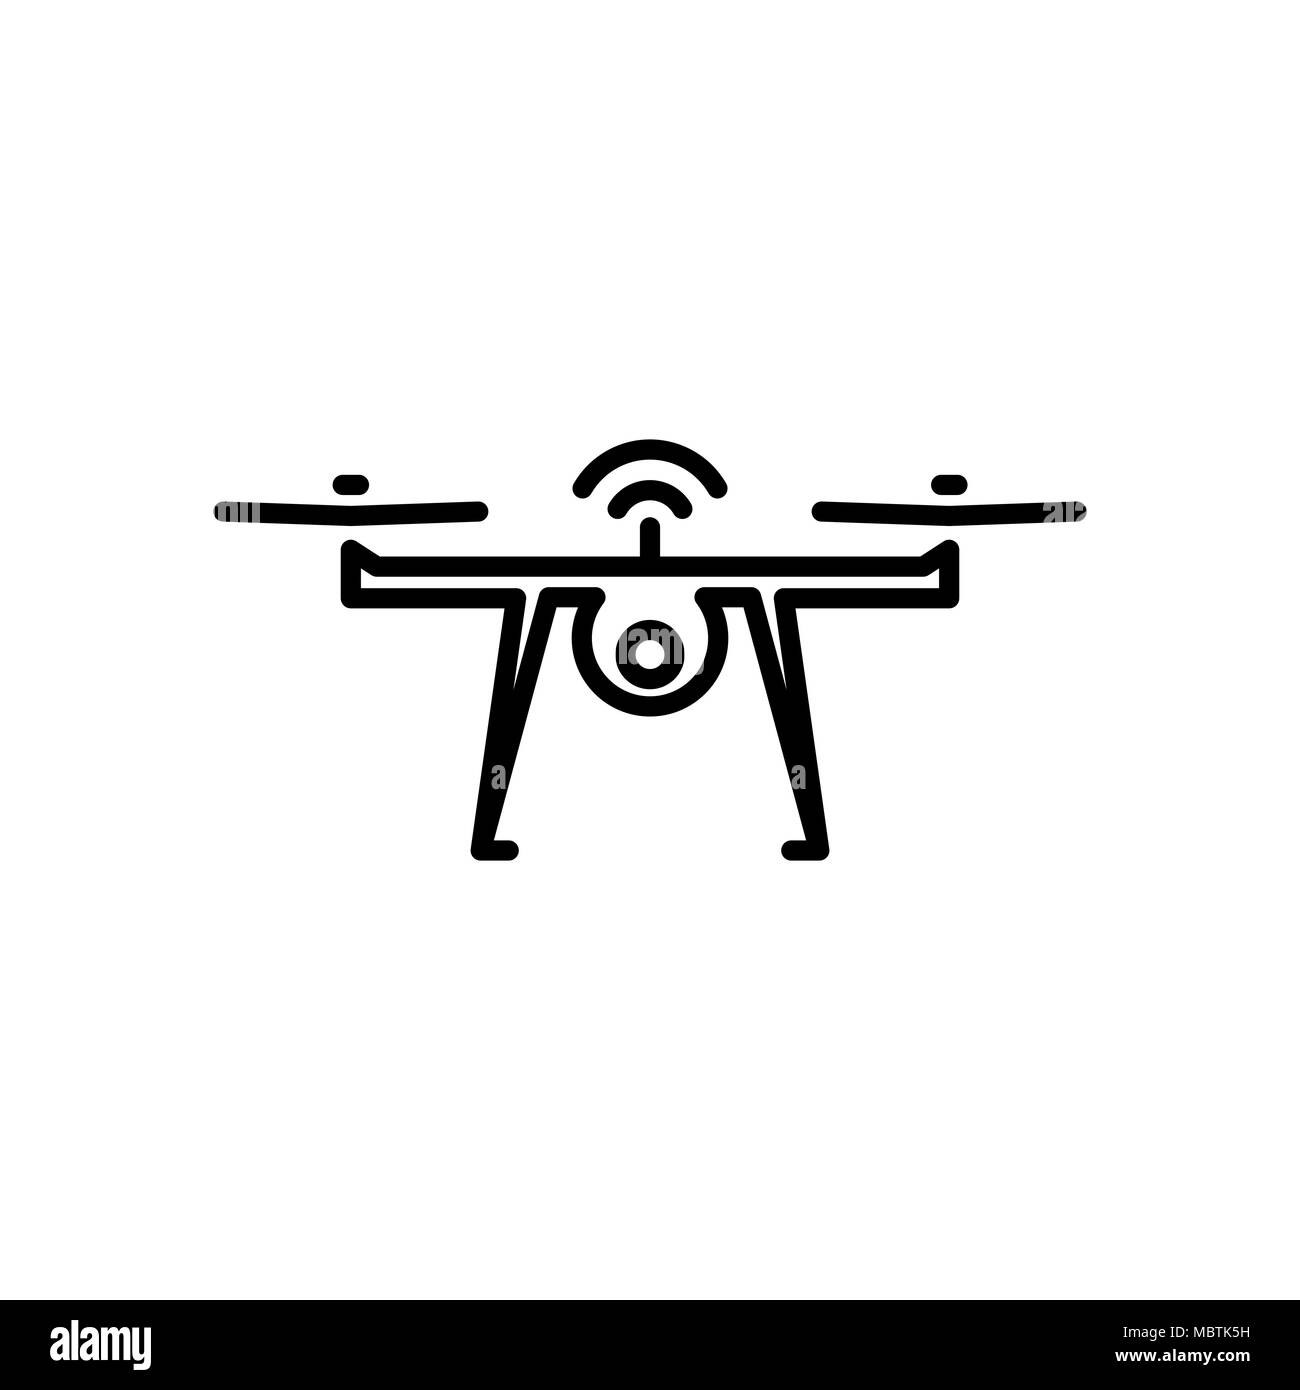 Air drone icon simple flat vector illustration. Stock Vector